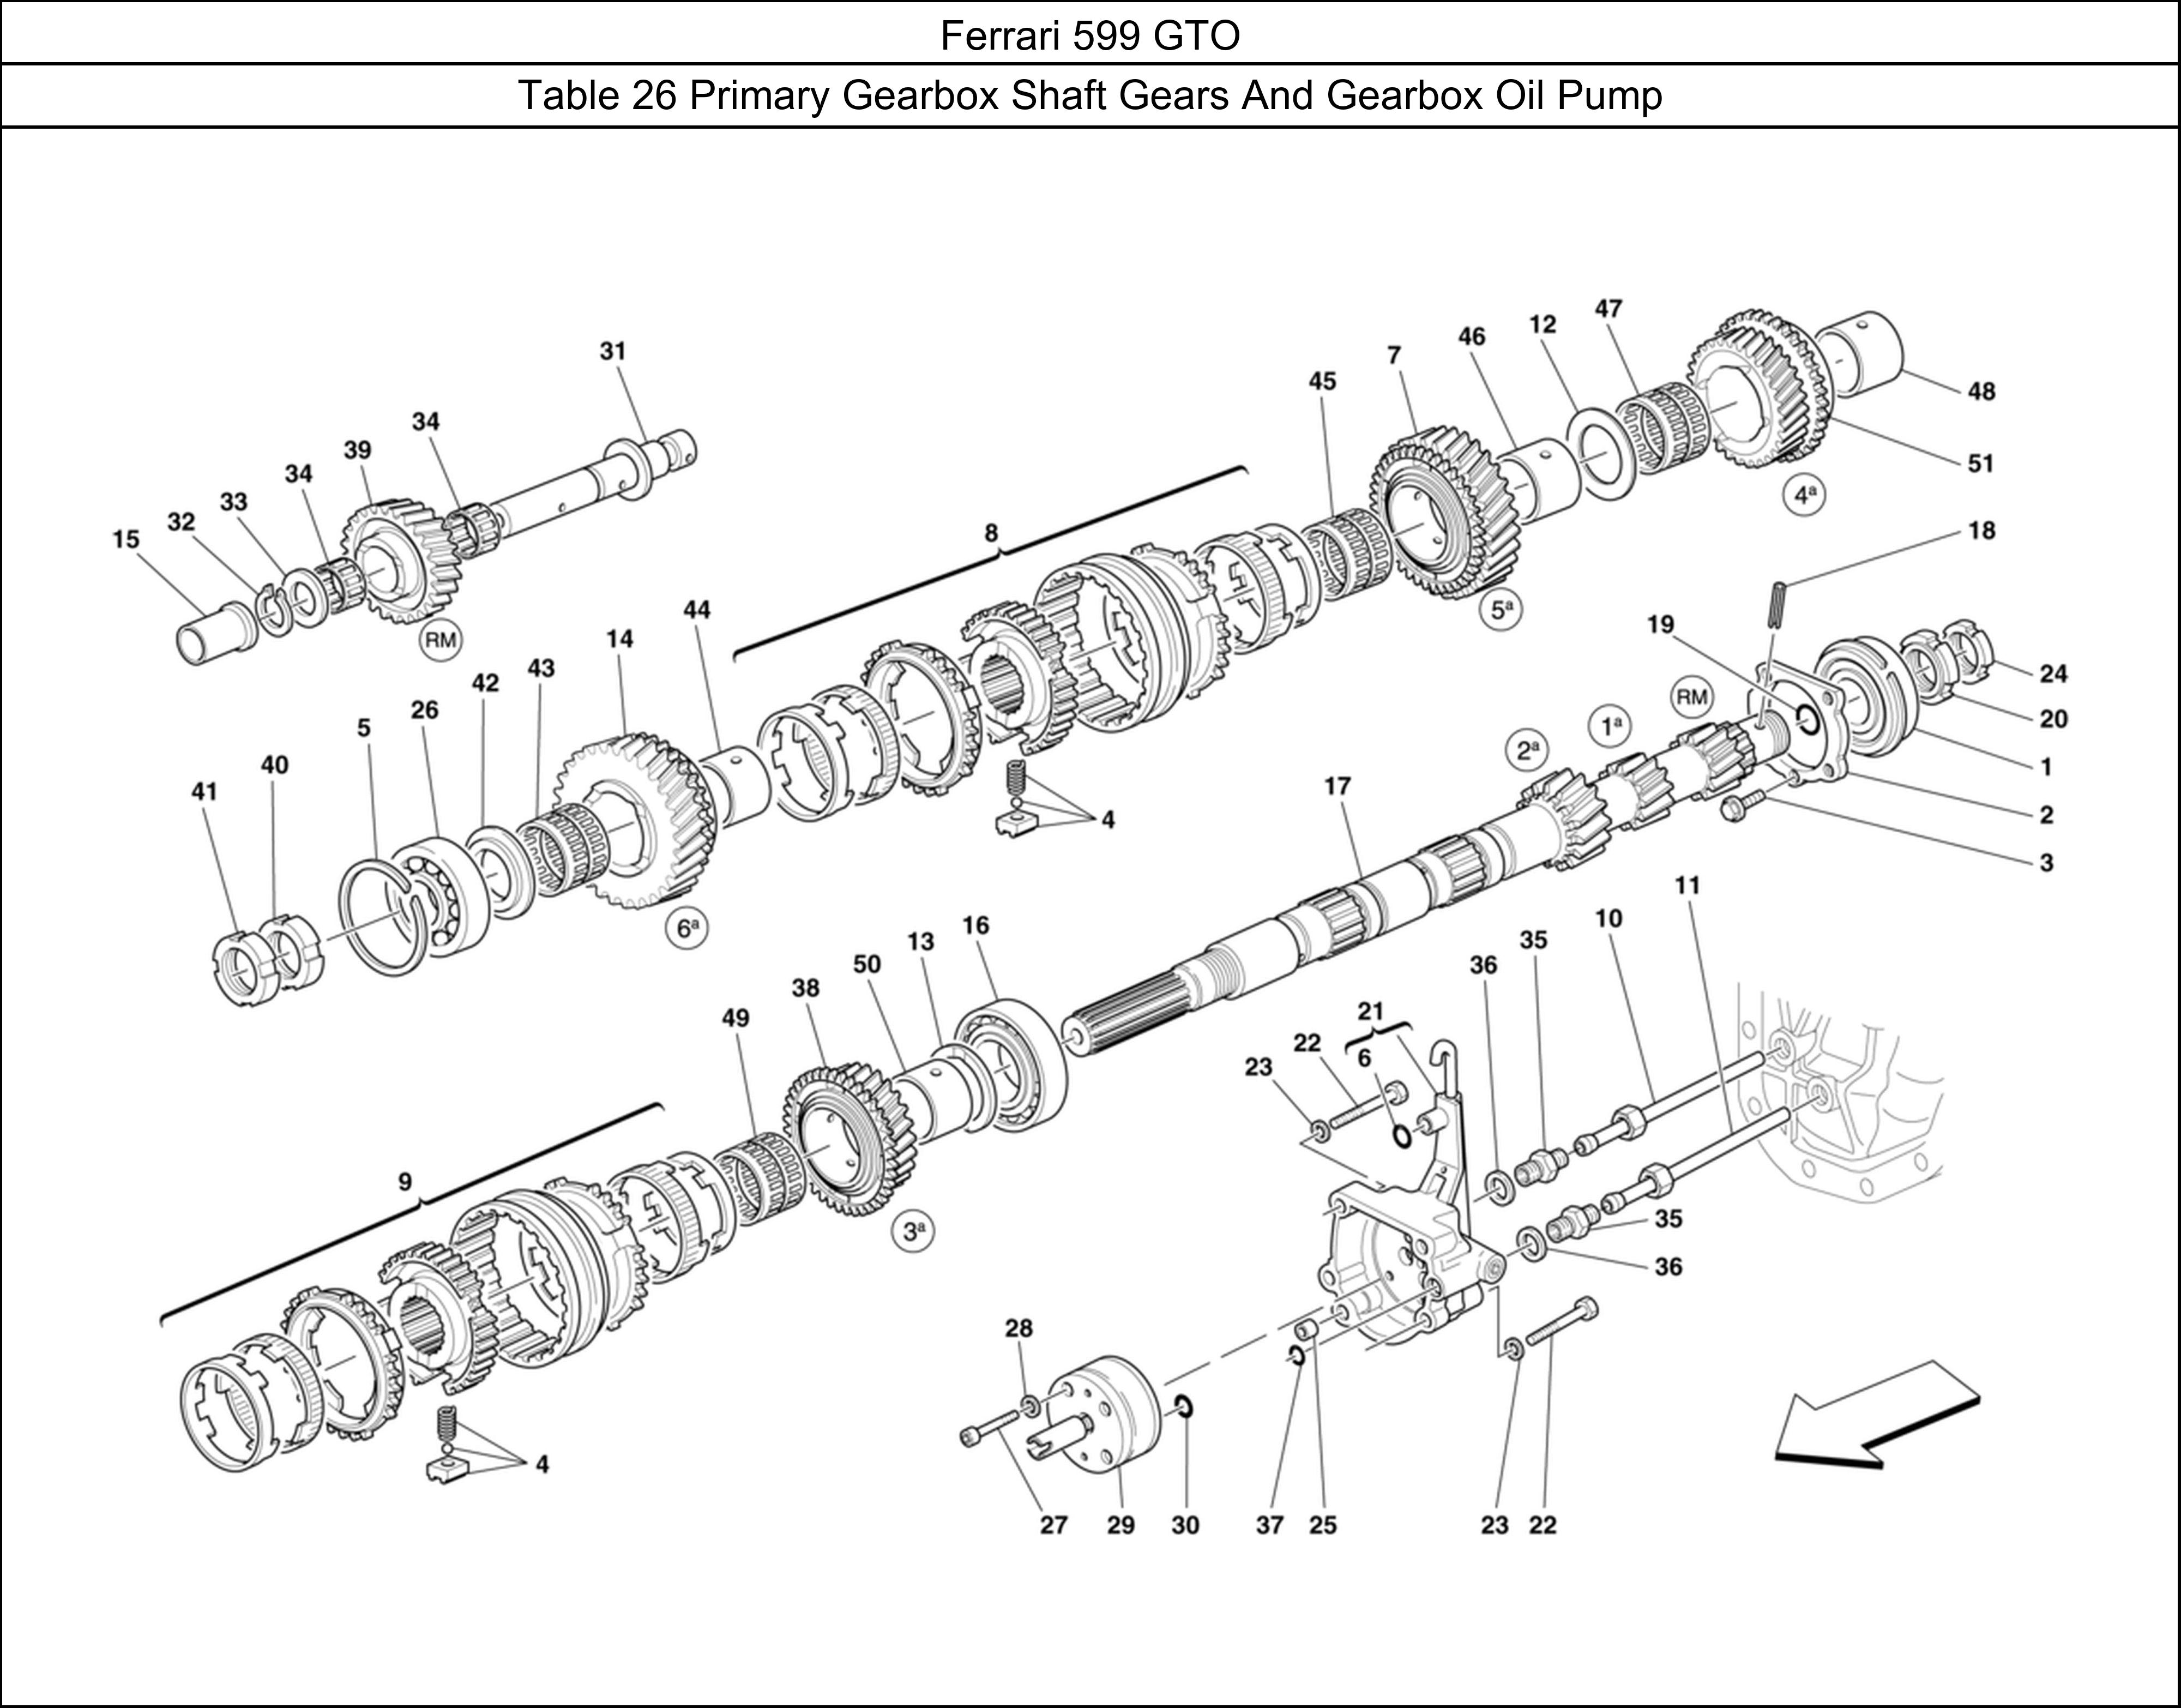 Ferrari Parts Ferrari 599 GTO Table 26 Primary Gearbox Shaft Gears And Gearbox Oil Pump